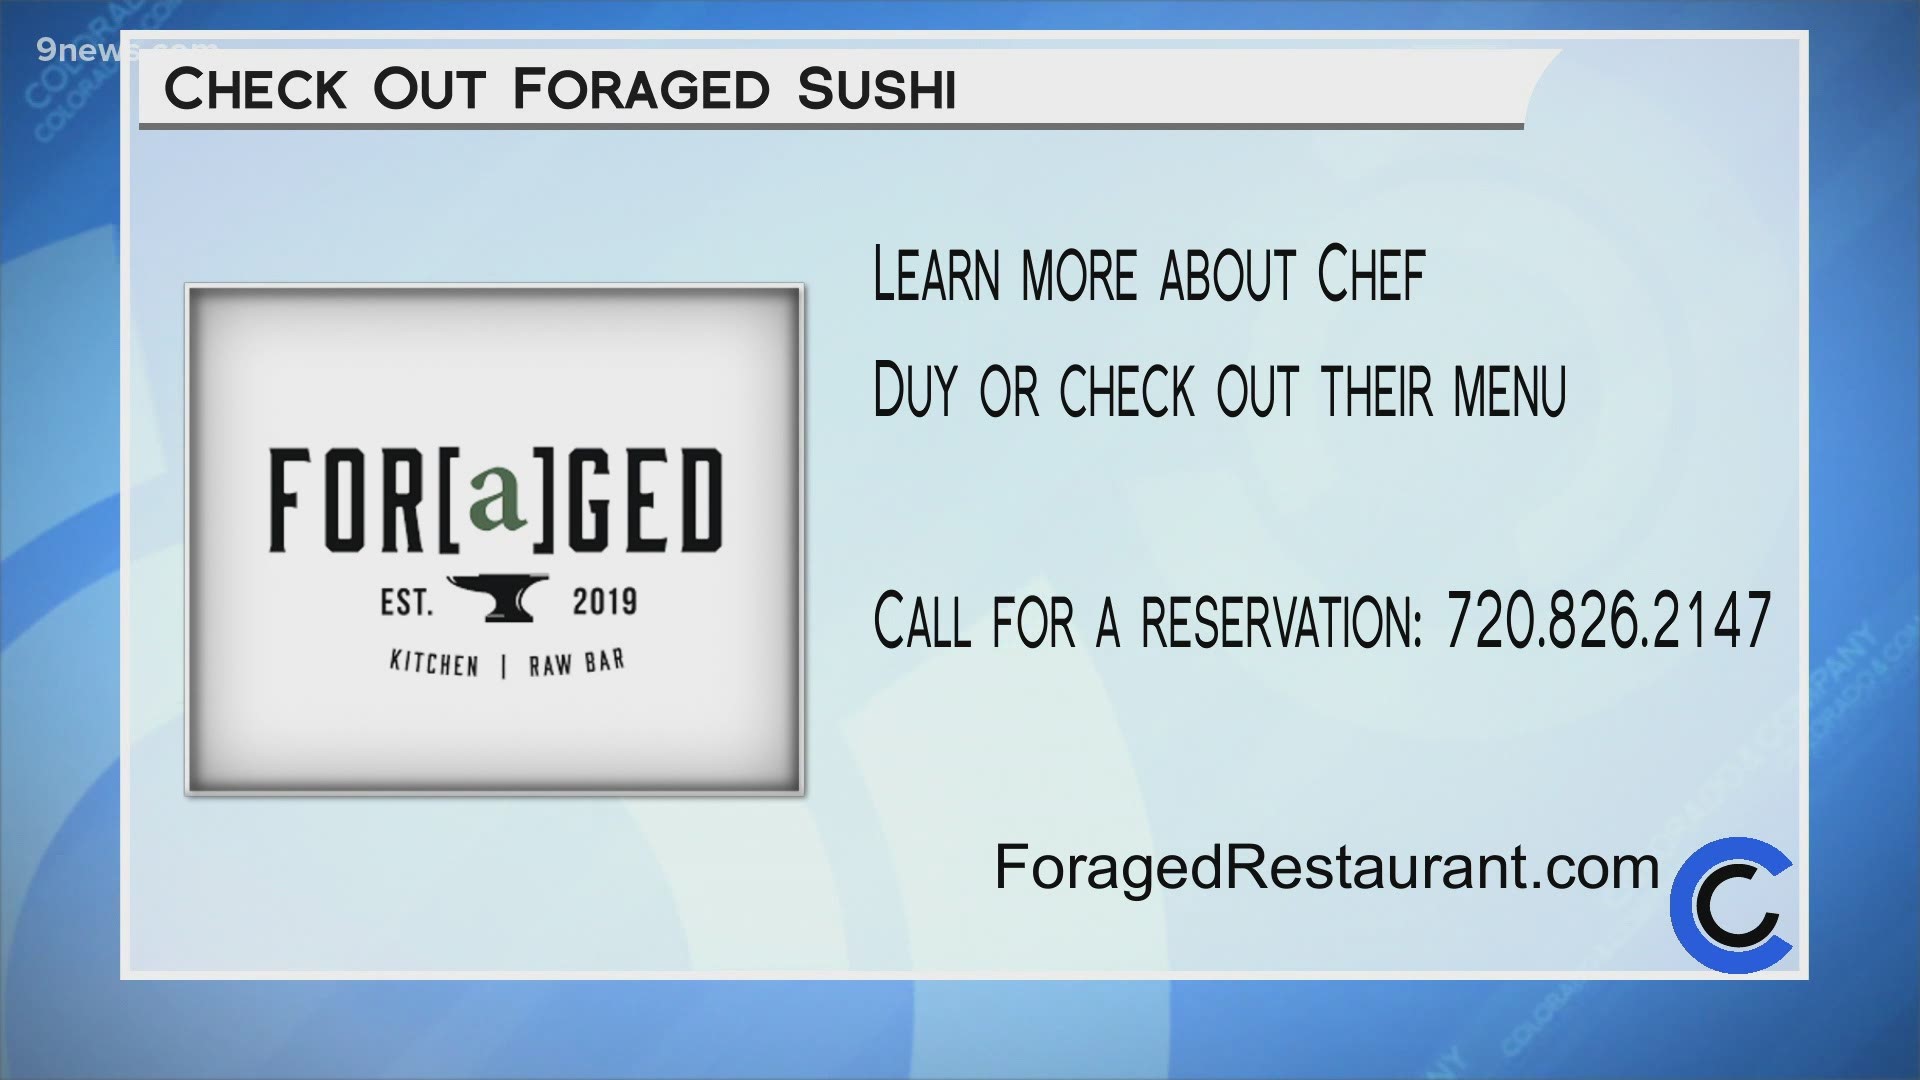 Find the incredible Foraged Sushi menu at ForagedRestaurant.com or call 720.826.2147 to make a reservation.